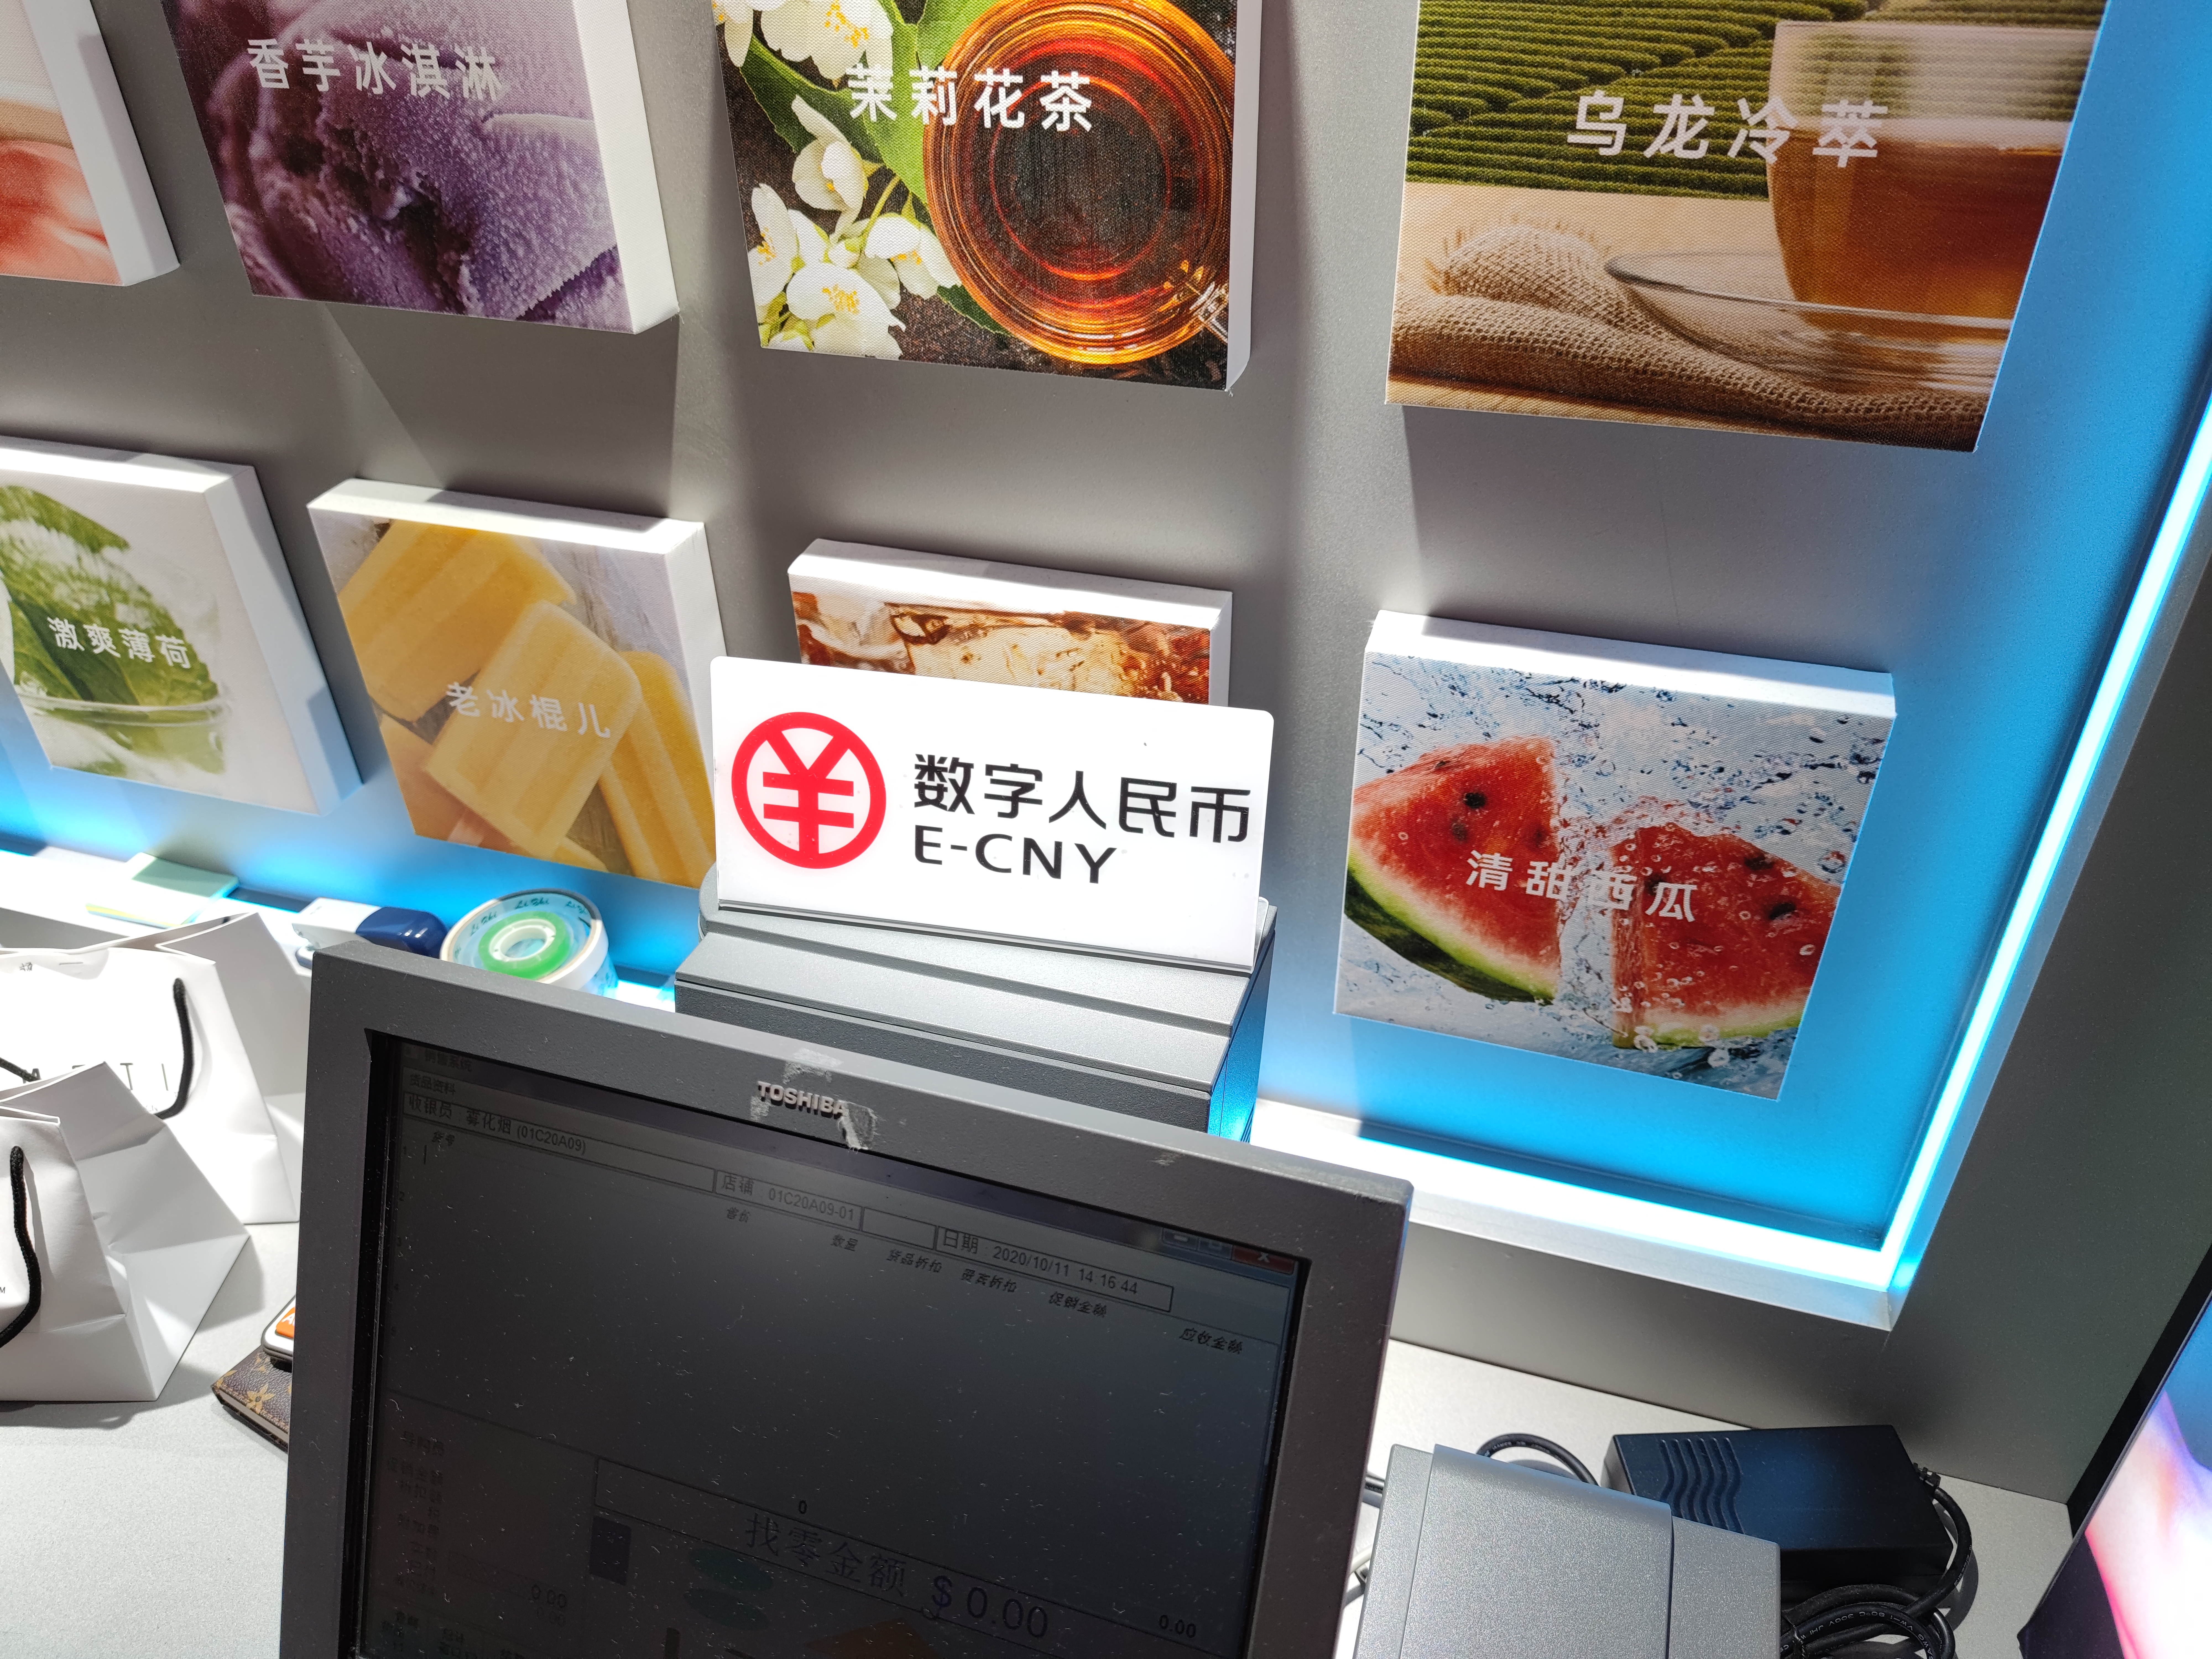 An E-CNY payment sign is put up on a desk in a store in the Luohu District in Shenzhen city, south China's Guangdong province, 11 October 2020.The Shenzhen municipal government announced a giveaway of ten million renminbi ($1.5 million) in central bank digital currency (CBDC). Fifty thousand people would receive the gifted money on a lottery basis in amounts of 200 yuan as part of the digital yuan tests and the trial was in the Luohu District. In accordance with the trial, about 3389 shops including restaurants and retail stores had updated and equiped system allowing eCNY payment in the Luohu District. As of 8p.m. on 11th October 2020, over 1.91million people participated in the lottery winning.No Use China. No Use France.